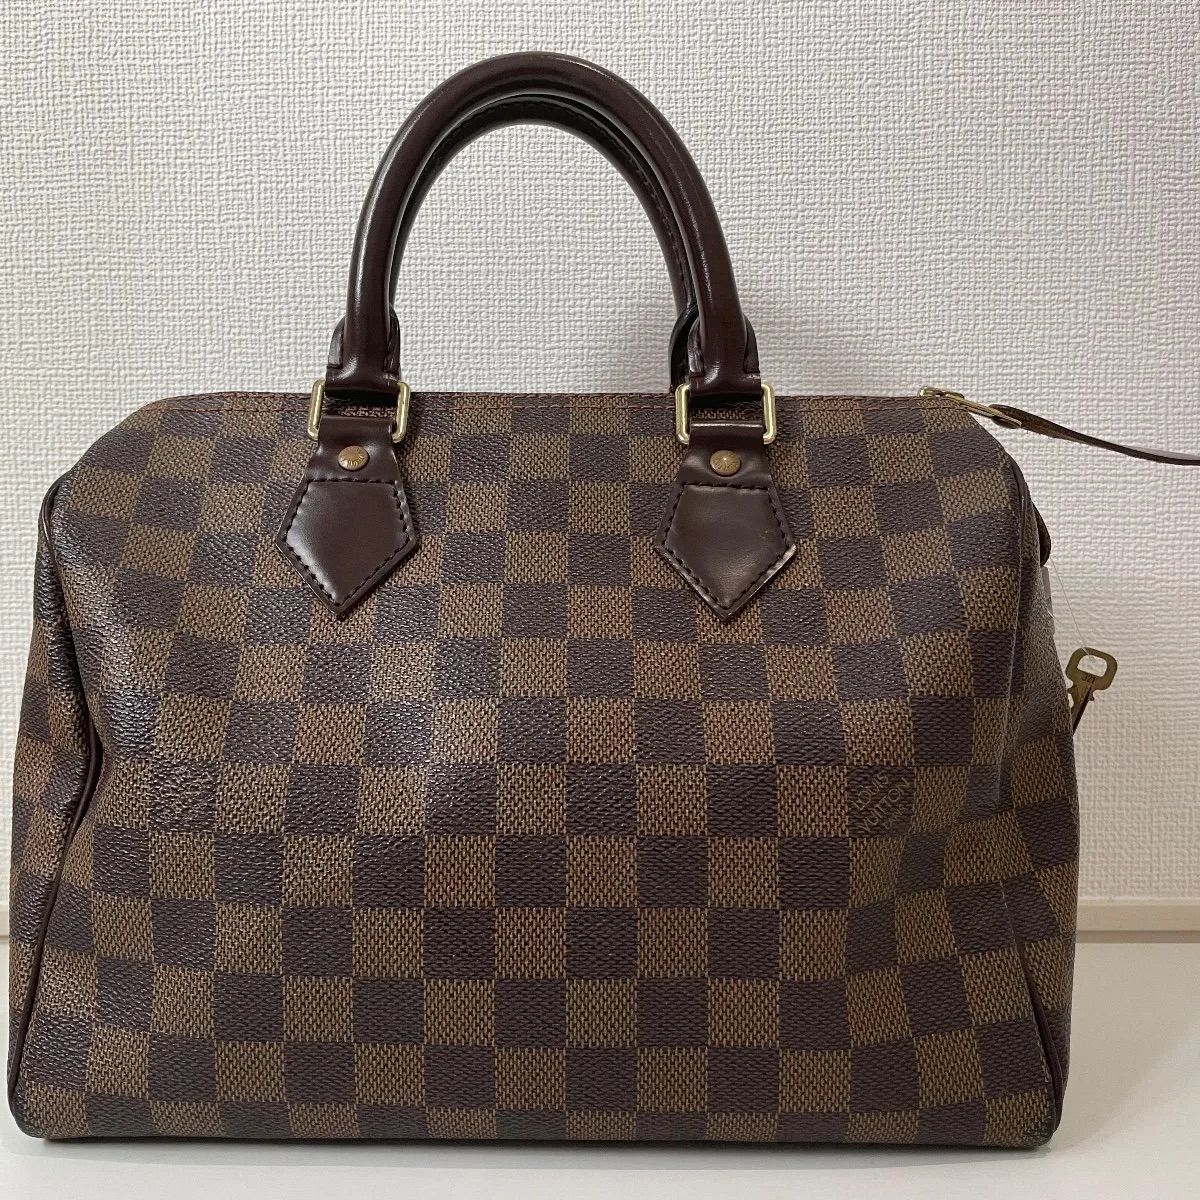 LOUIS VUITTON/ルイヴィトン ビトン N41532 スピーディ25 ダミエ ...